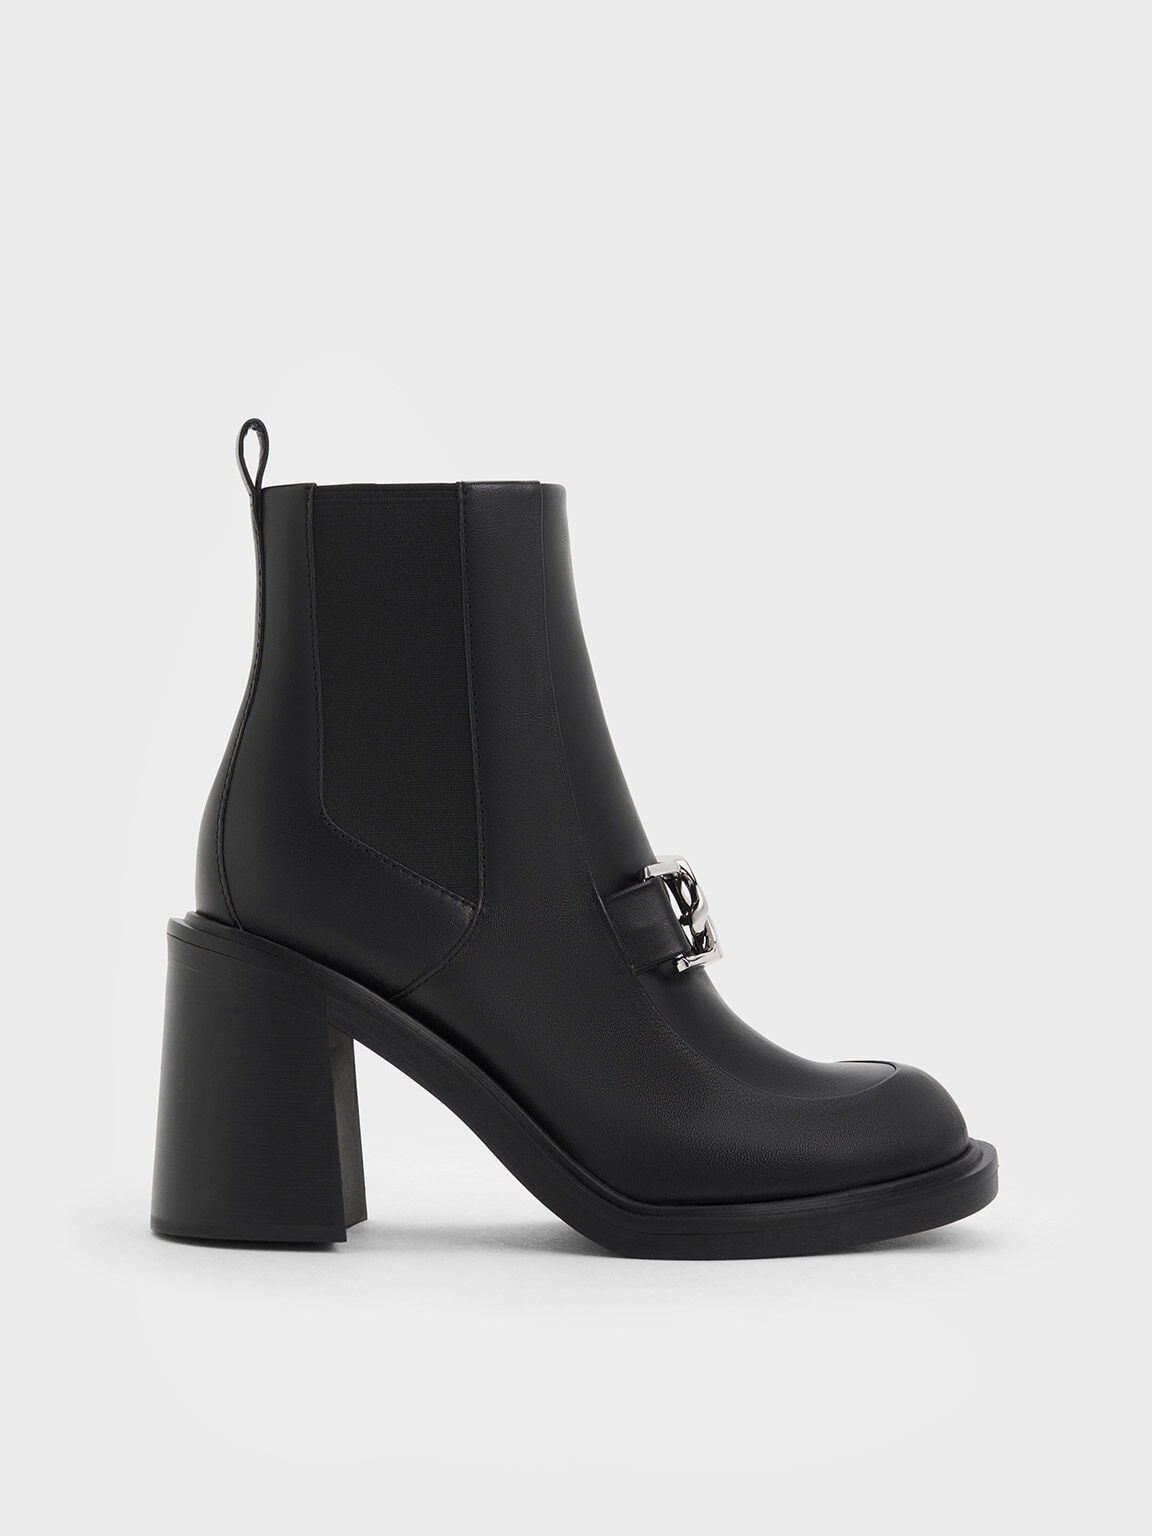 Solada Women's leather ankle boots with heels: for sale at 59.99€ on  Mecshopping.it